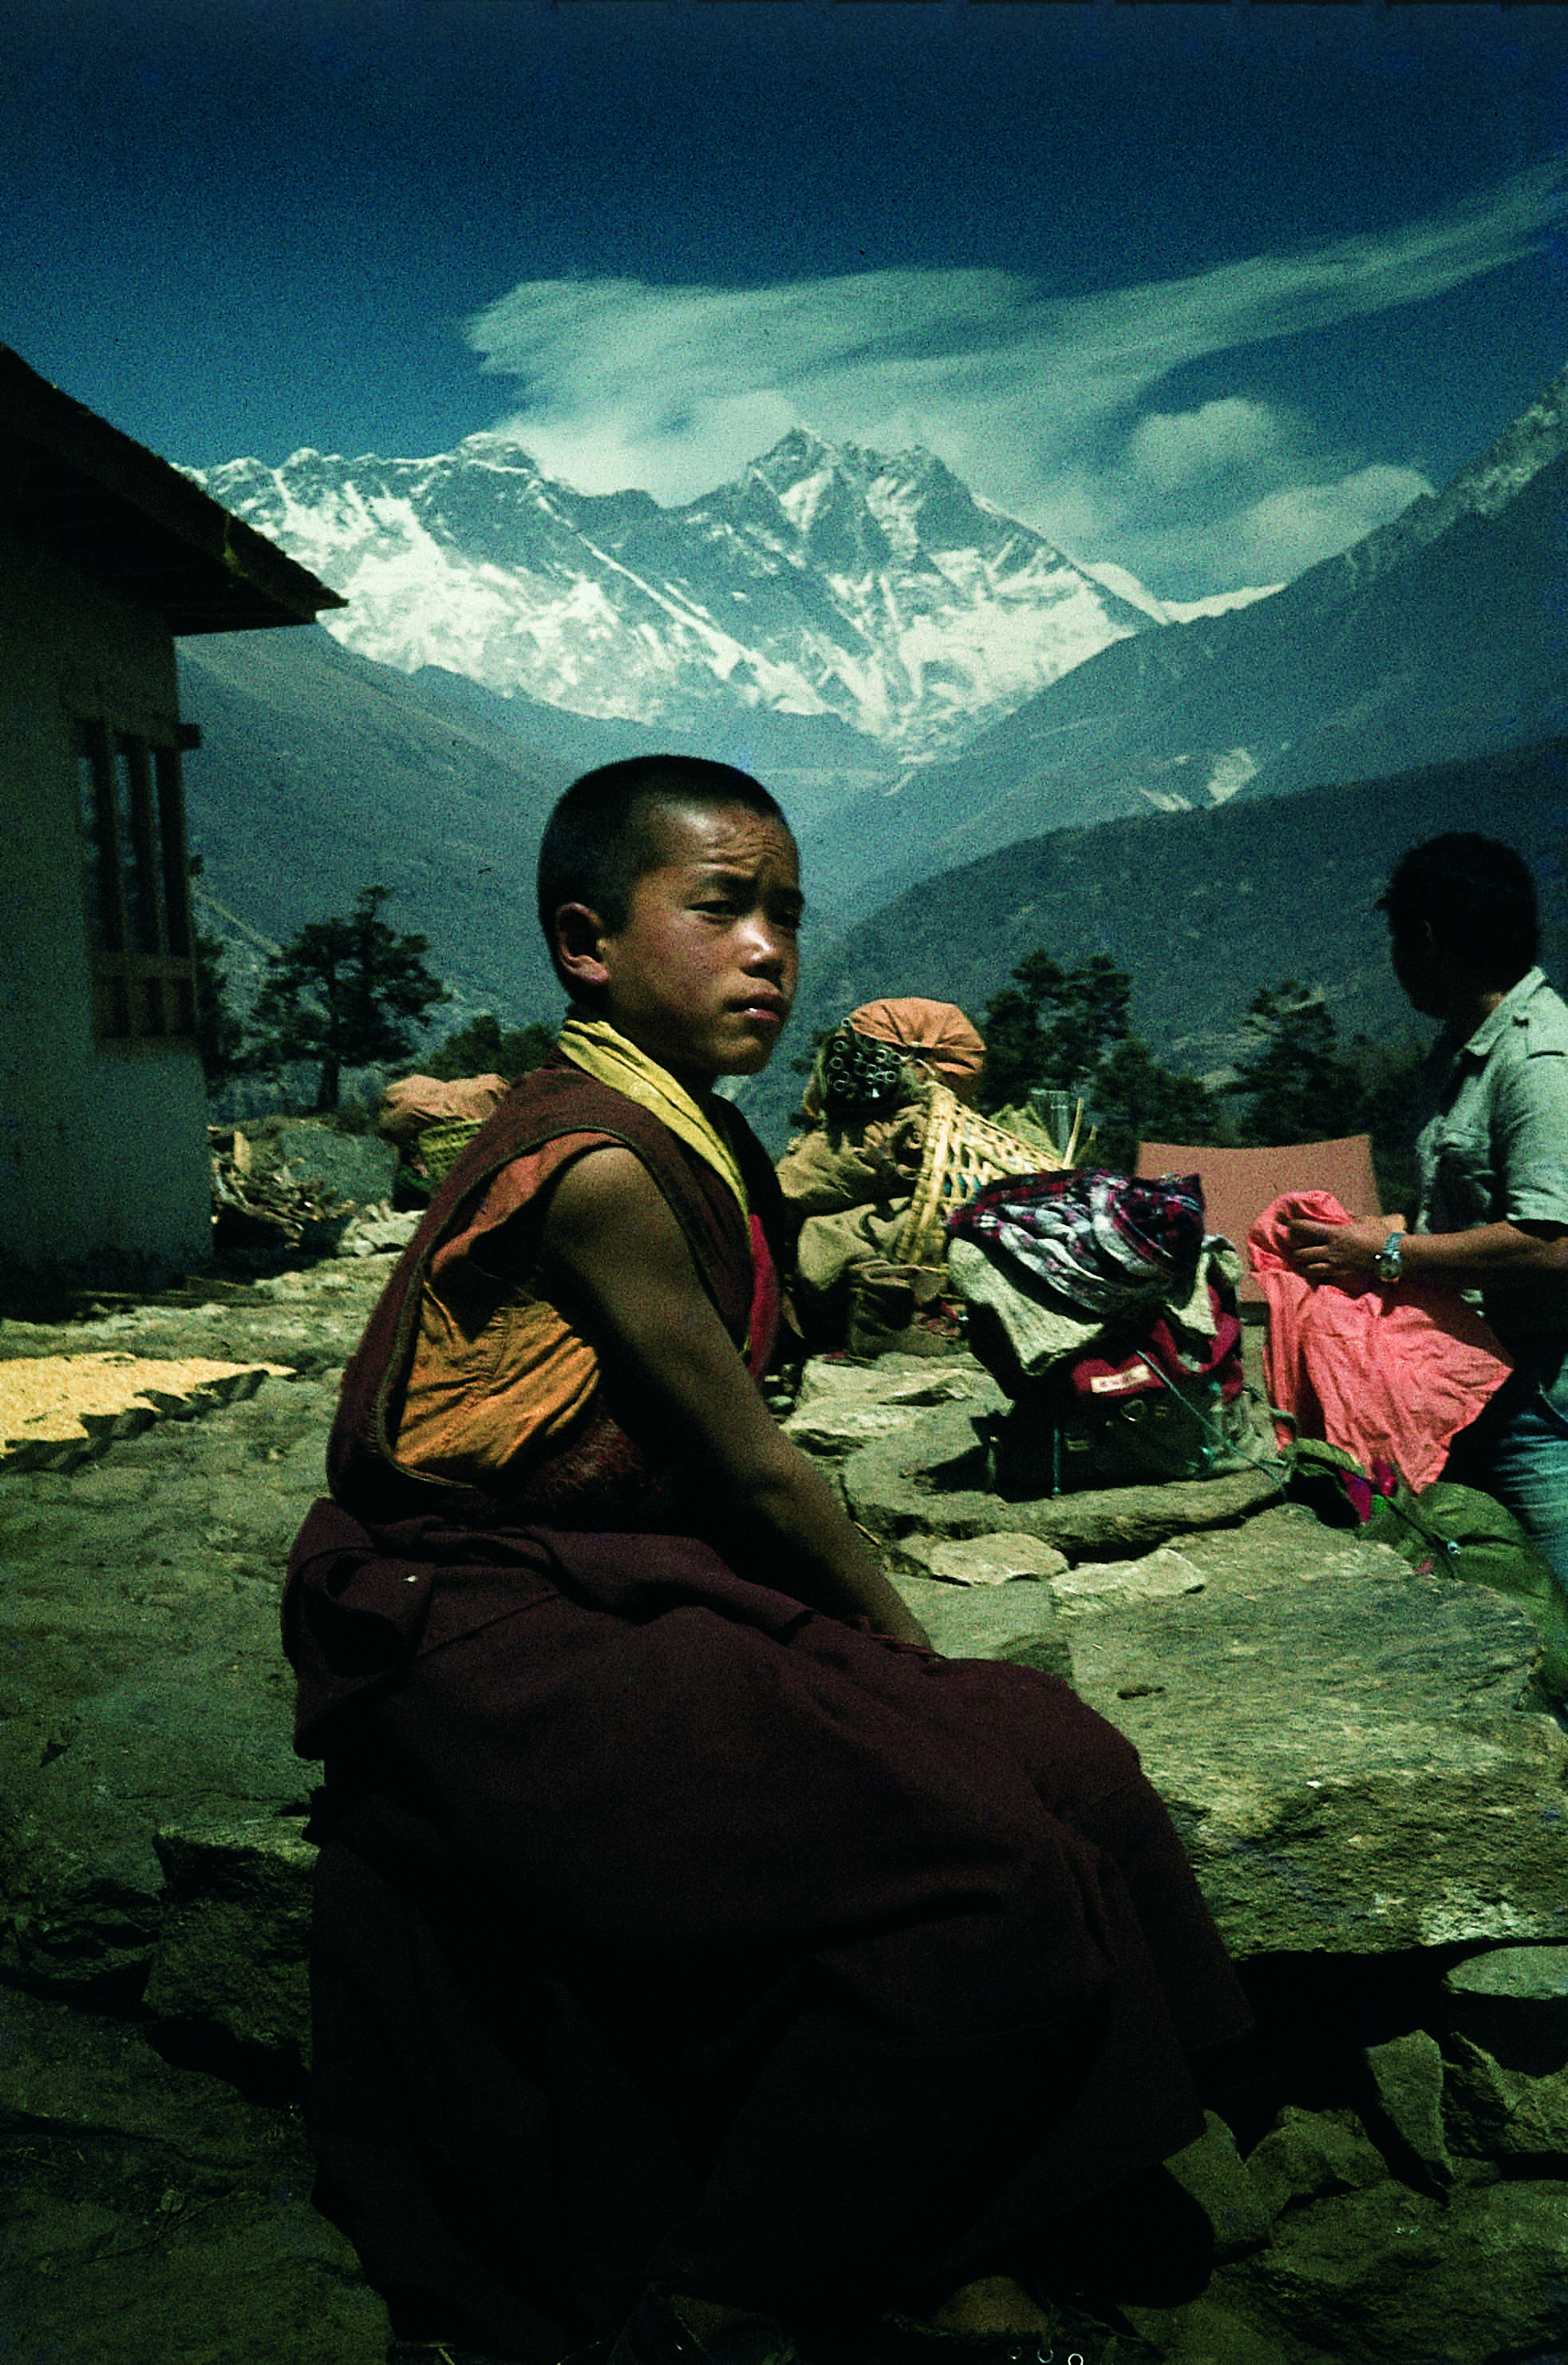 Buddhist boy in Thangboche monastery with Mount Everest in the background